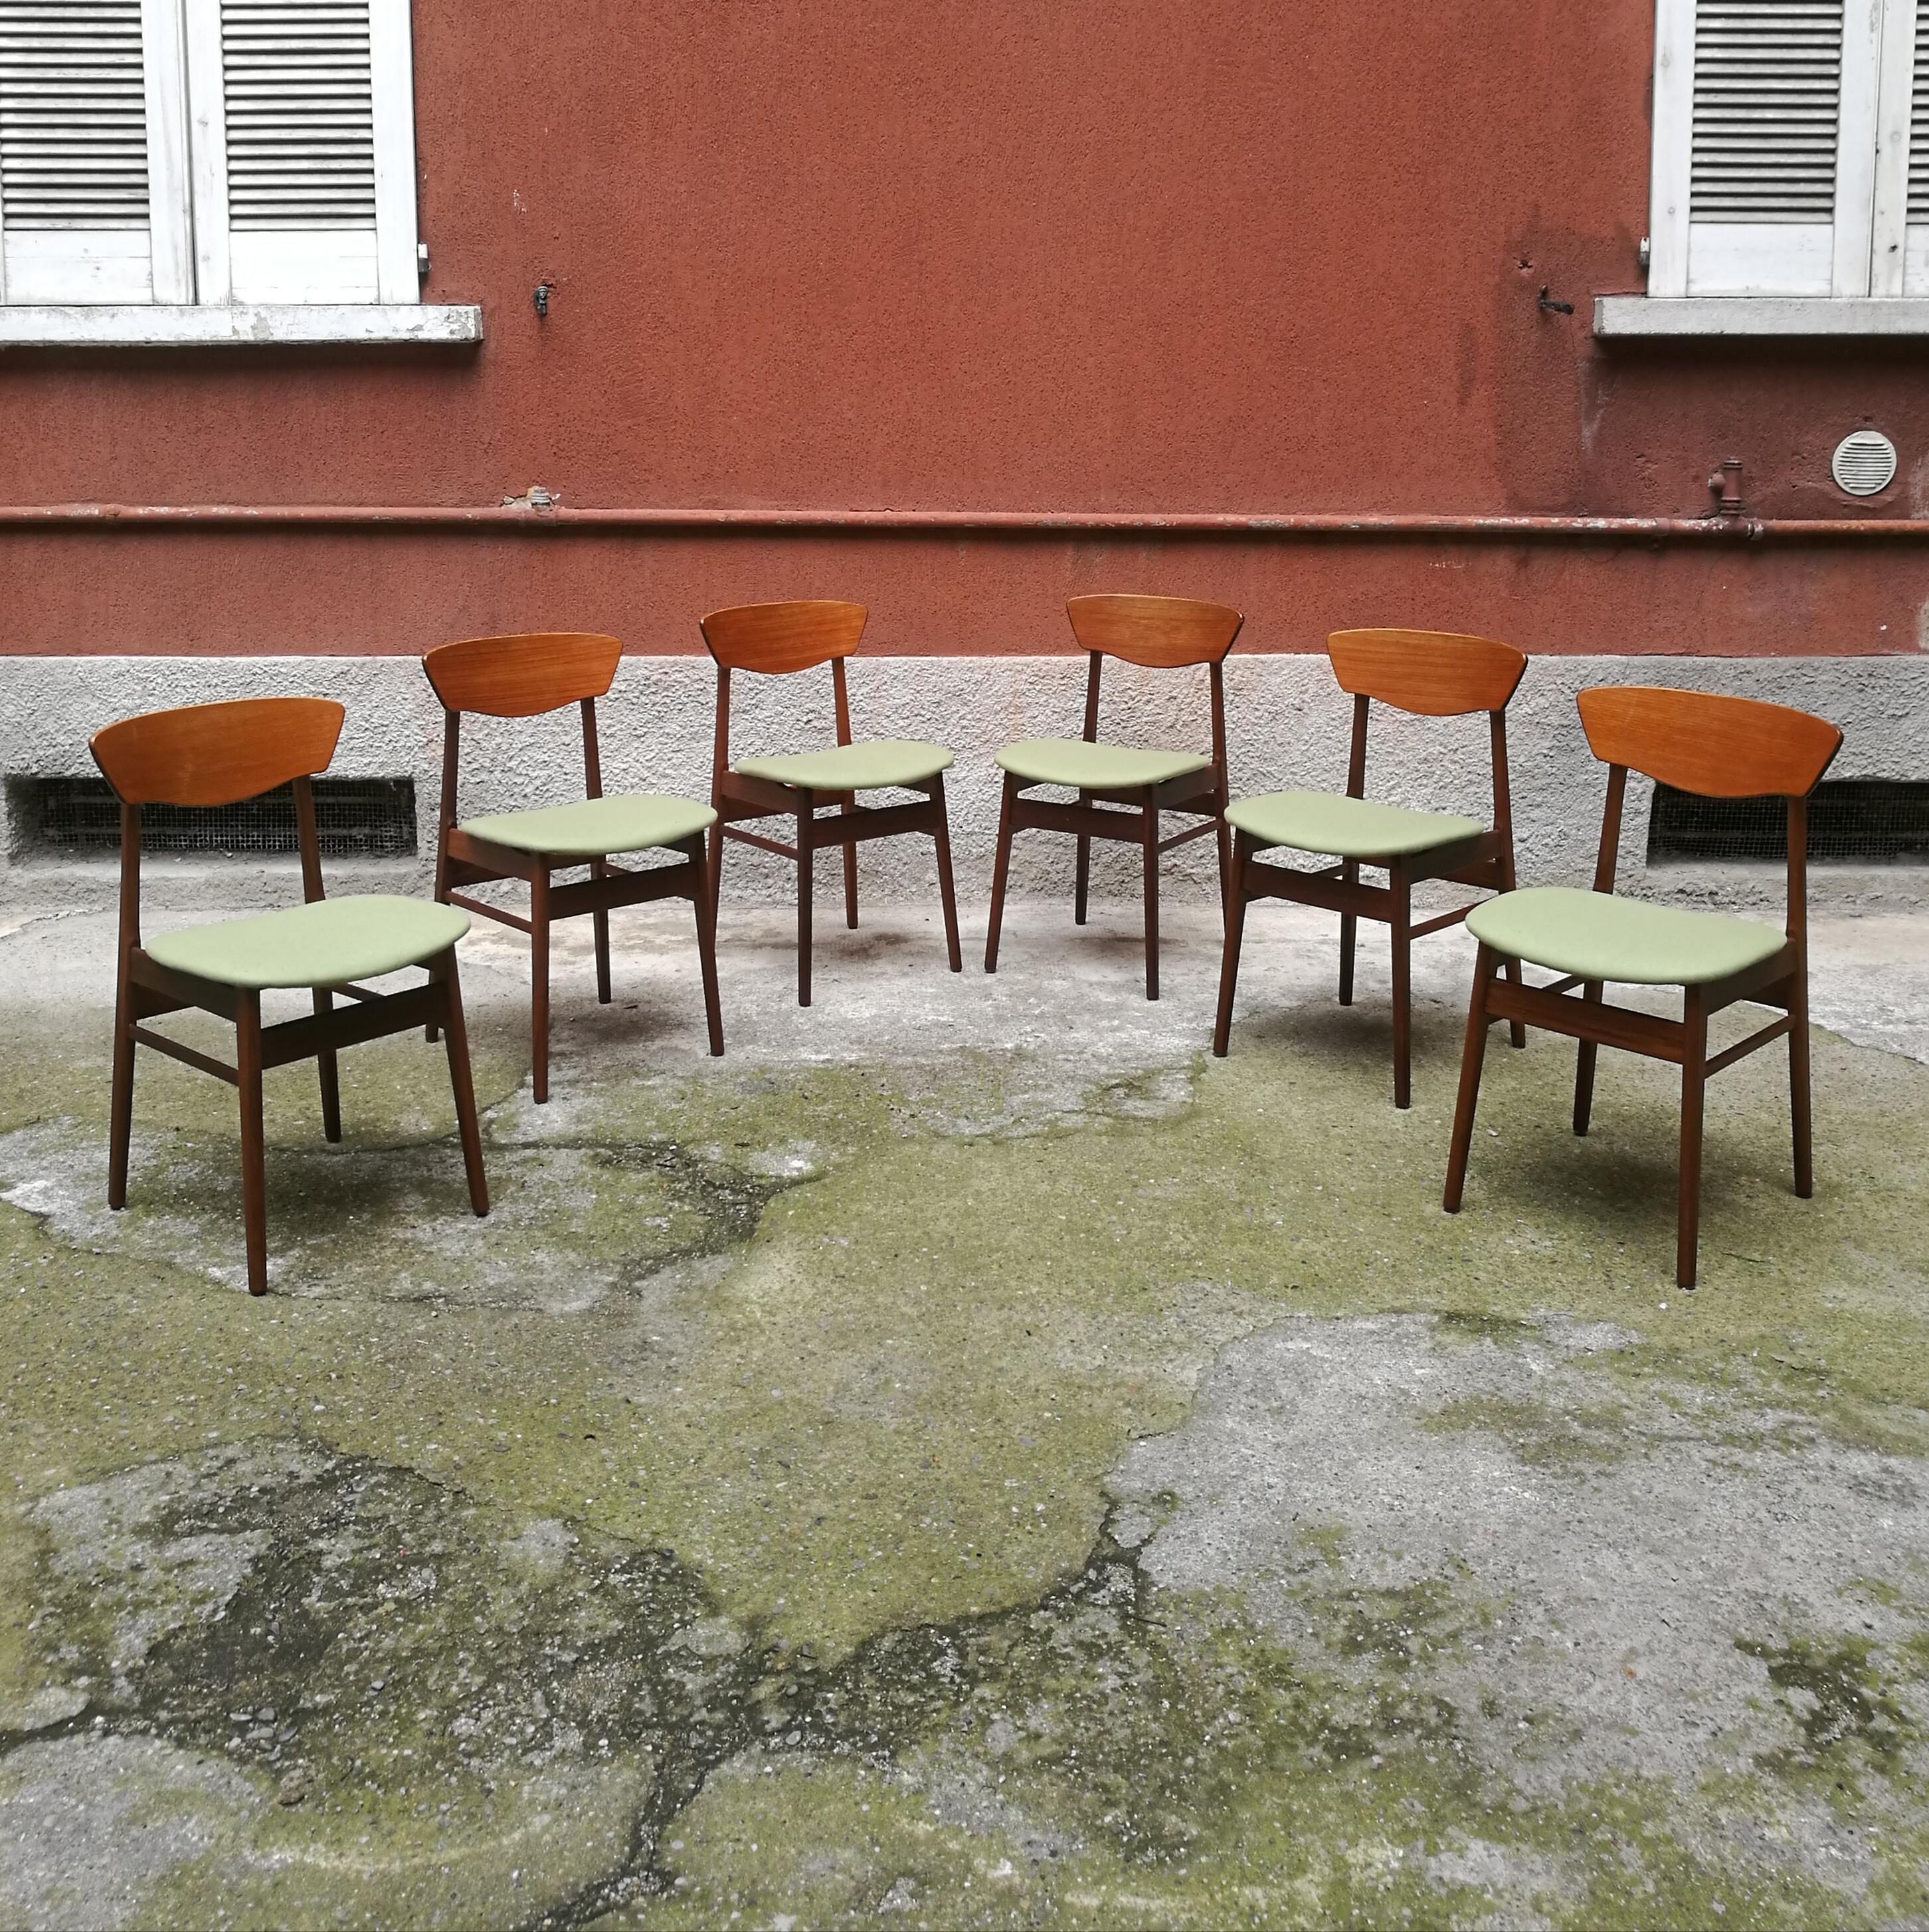 Danish teak chairs with green seats from 1960s
Superb set of six chairs from 1960s, made in Denmark. Lighter teak on the back and darker on the legs, while the seat as been upholstered and covered with a light green fabric. The curved structure of